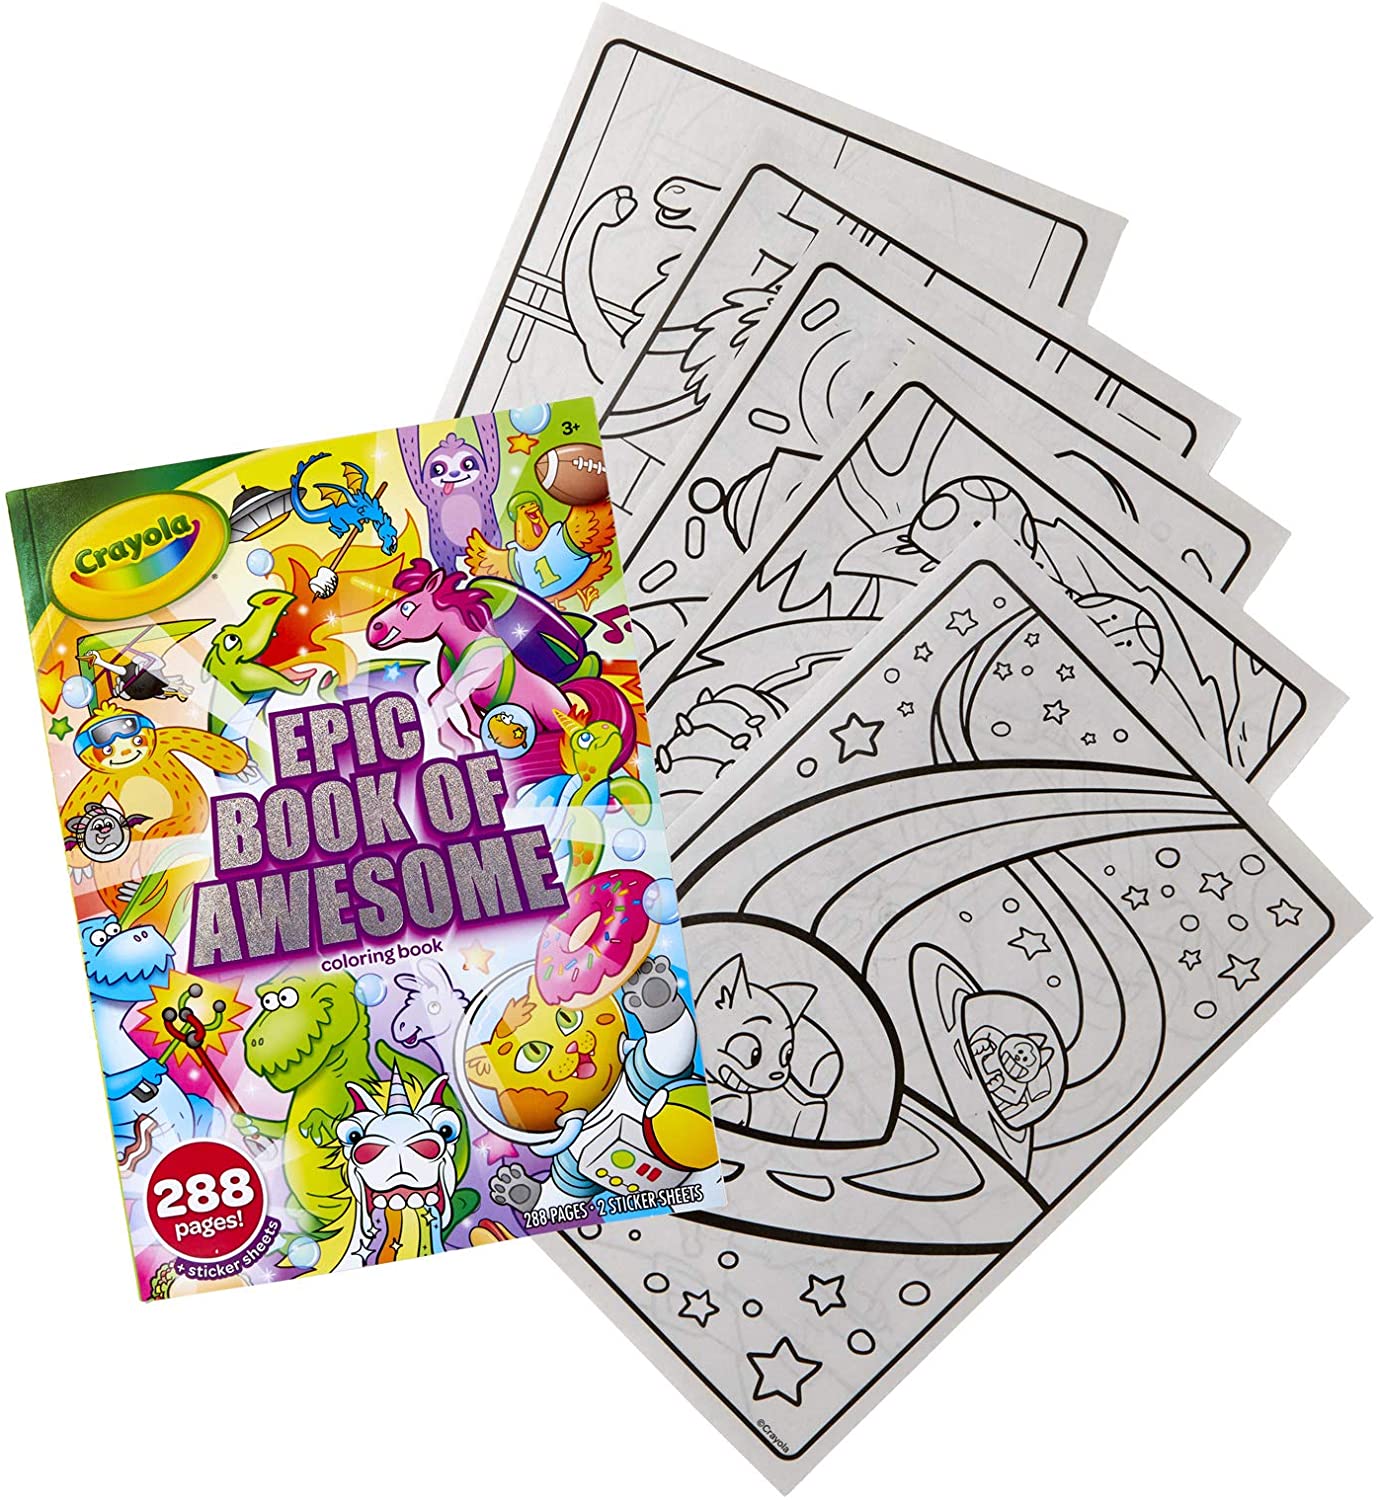 Crayola Epic Book of Awesome, All-in-One Coloring Book Set, 288 Pages, Kids  Indoor Activities, Gift